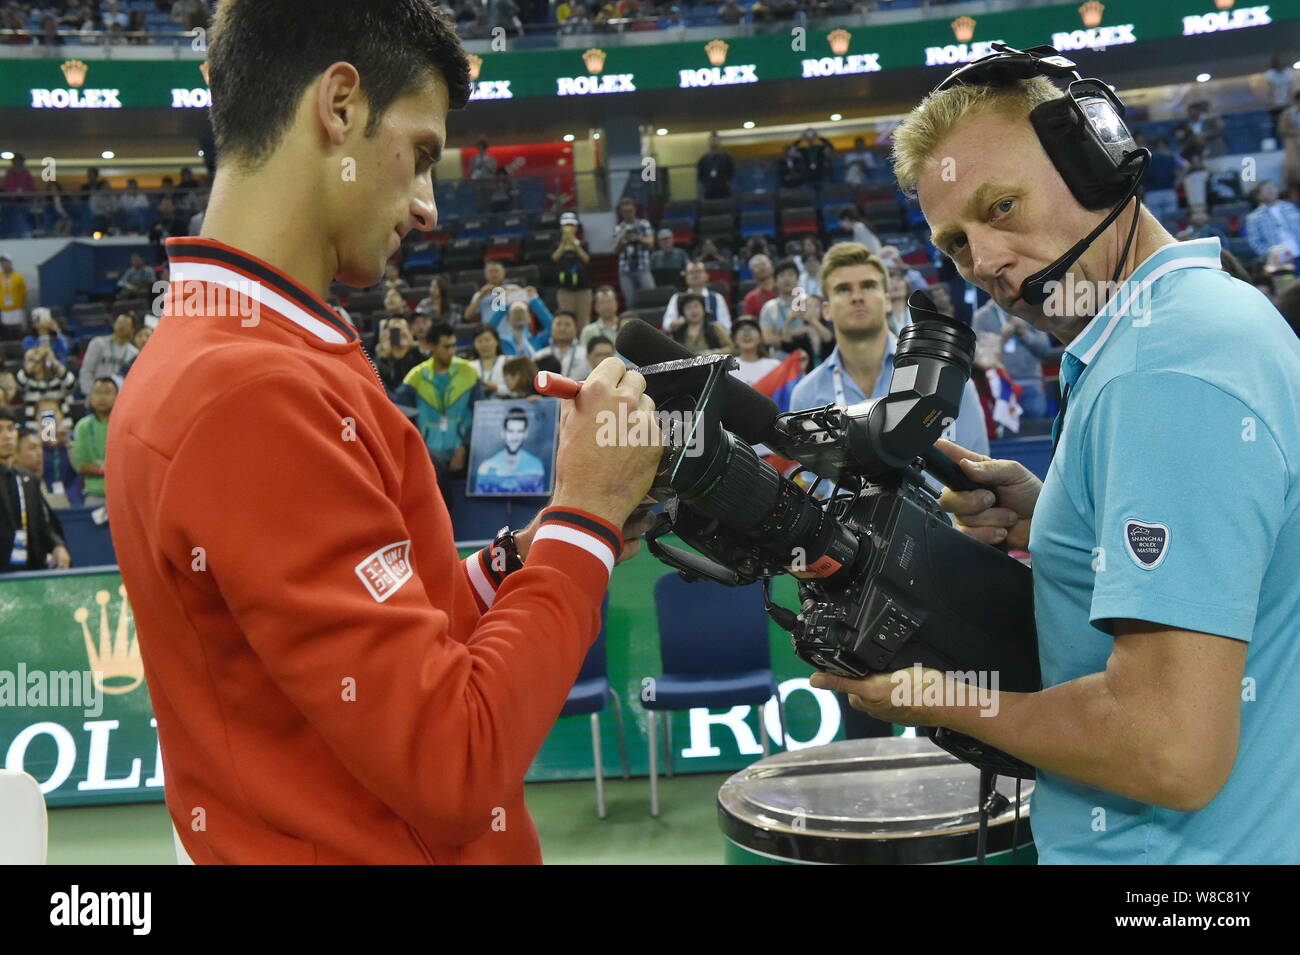 Novak Djokovic of Serbia, left, writes the Chinese character "Fu", meaning  "Blessing" in English, on the lens of a video camera after defeating Felici  Stock Photo - Alamy